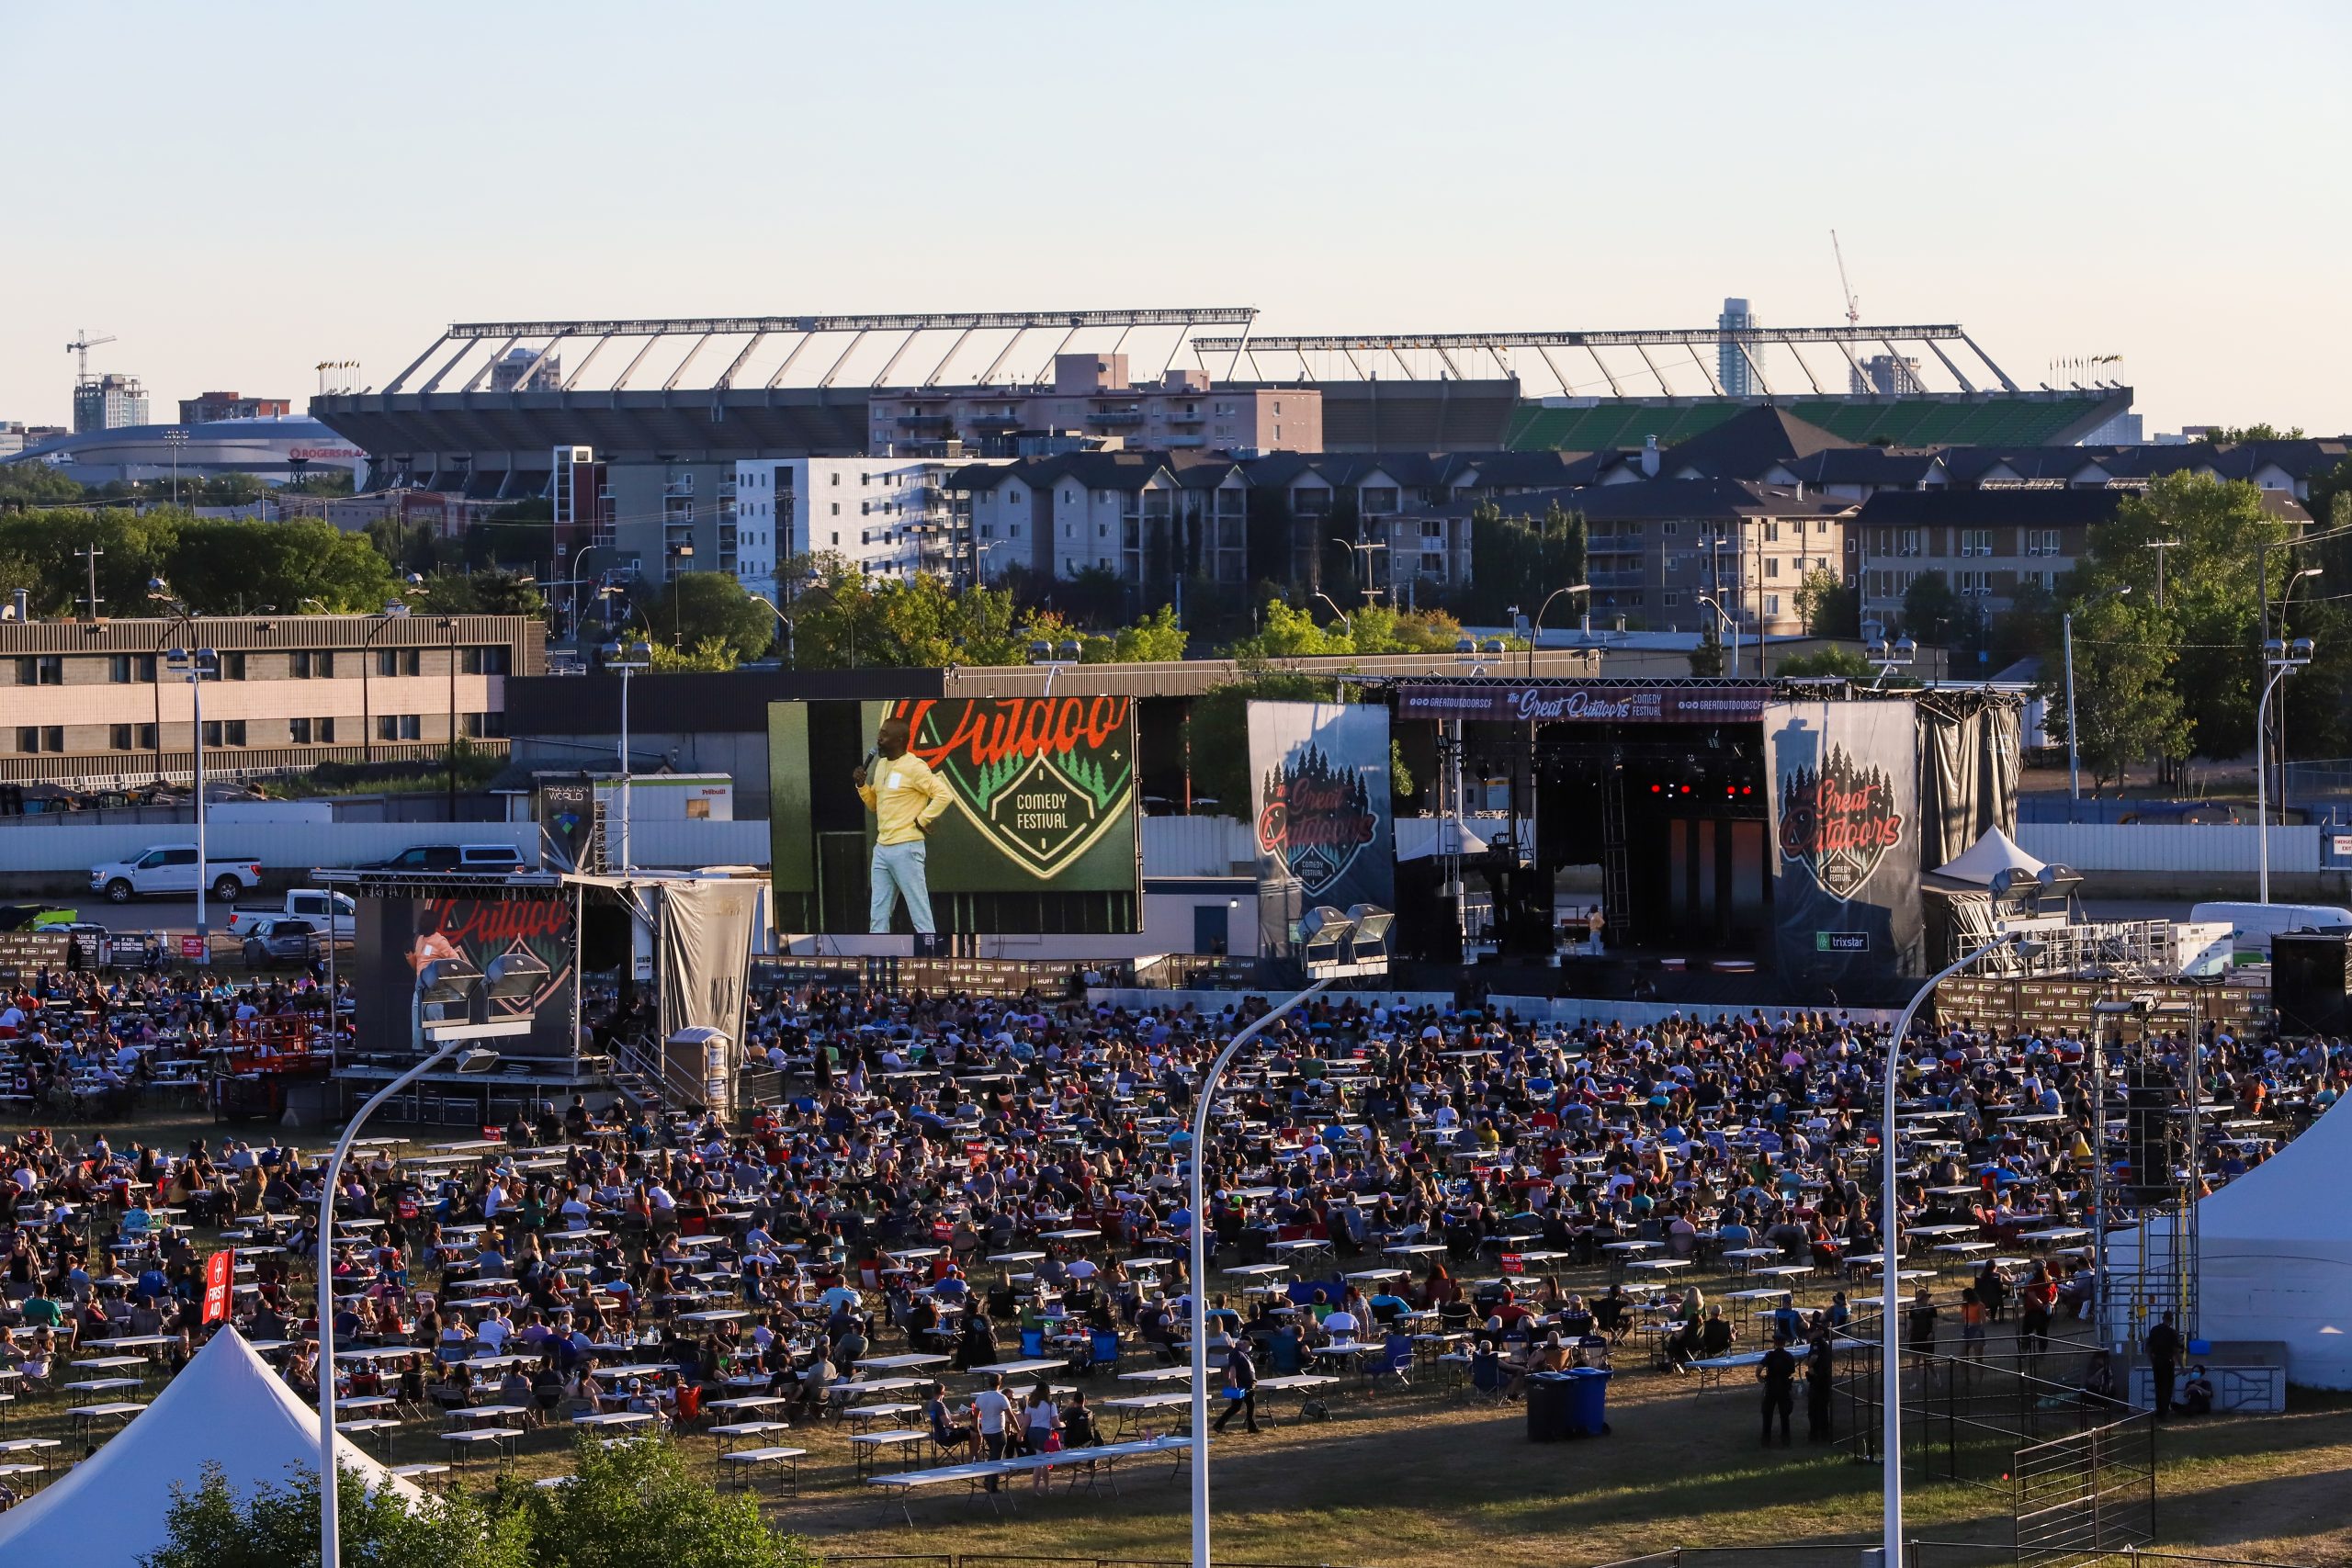 Explore Edmonton - Wide shot of The Great Outdoors Comedy Festival